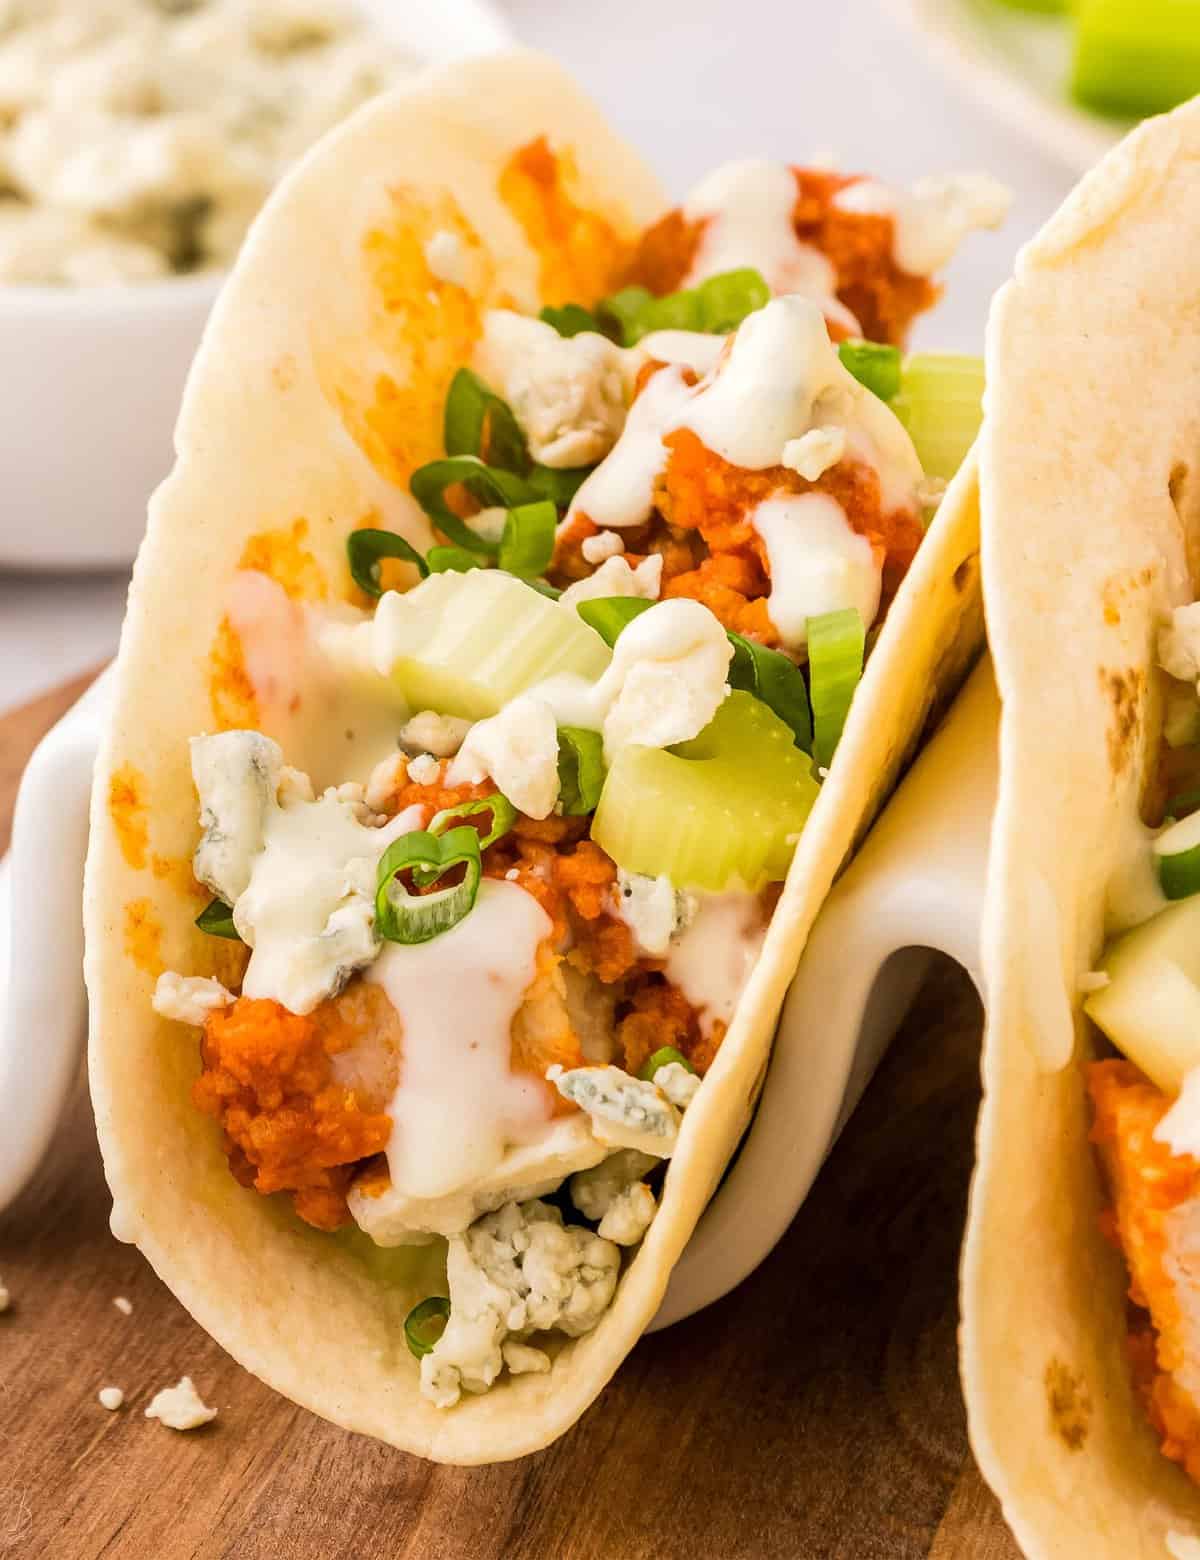 These buffalo chicken tacos are a great semi-homemade dinner or appetizer idea. Frozen chicken tenders make these super easy to get on the table, and fast!